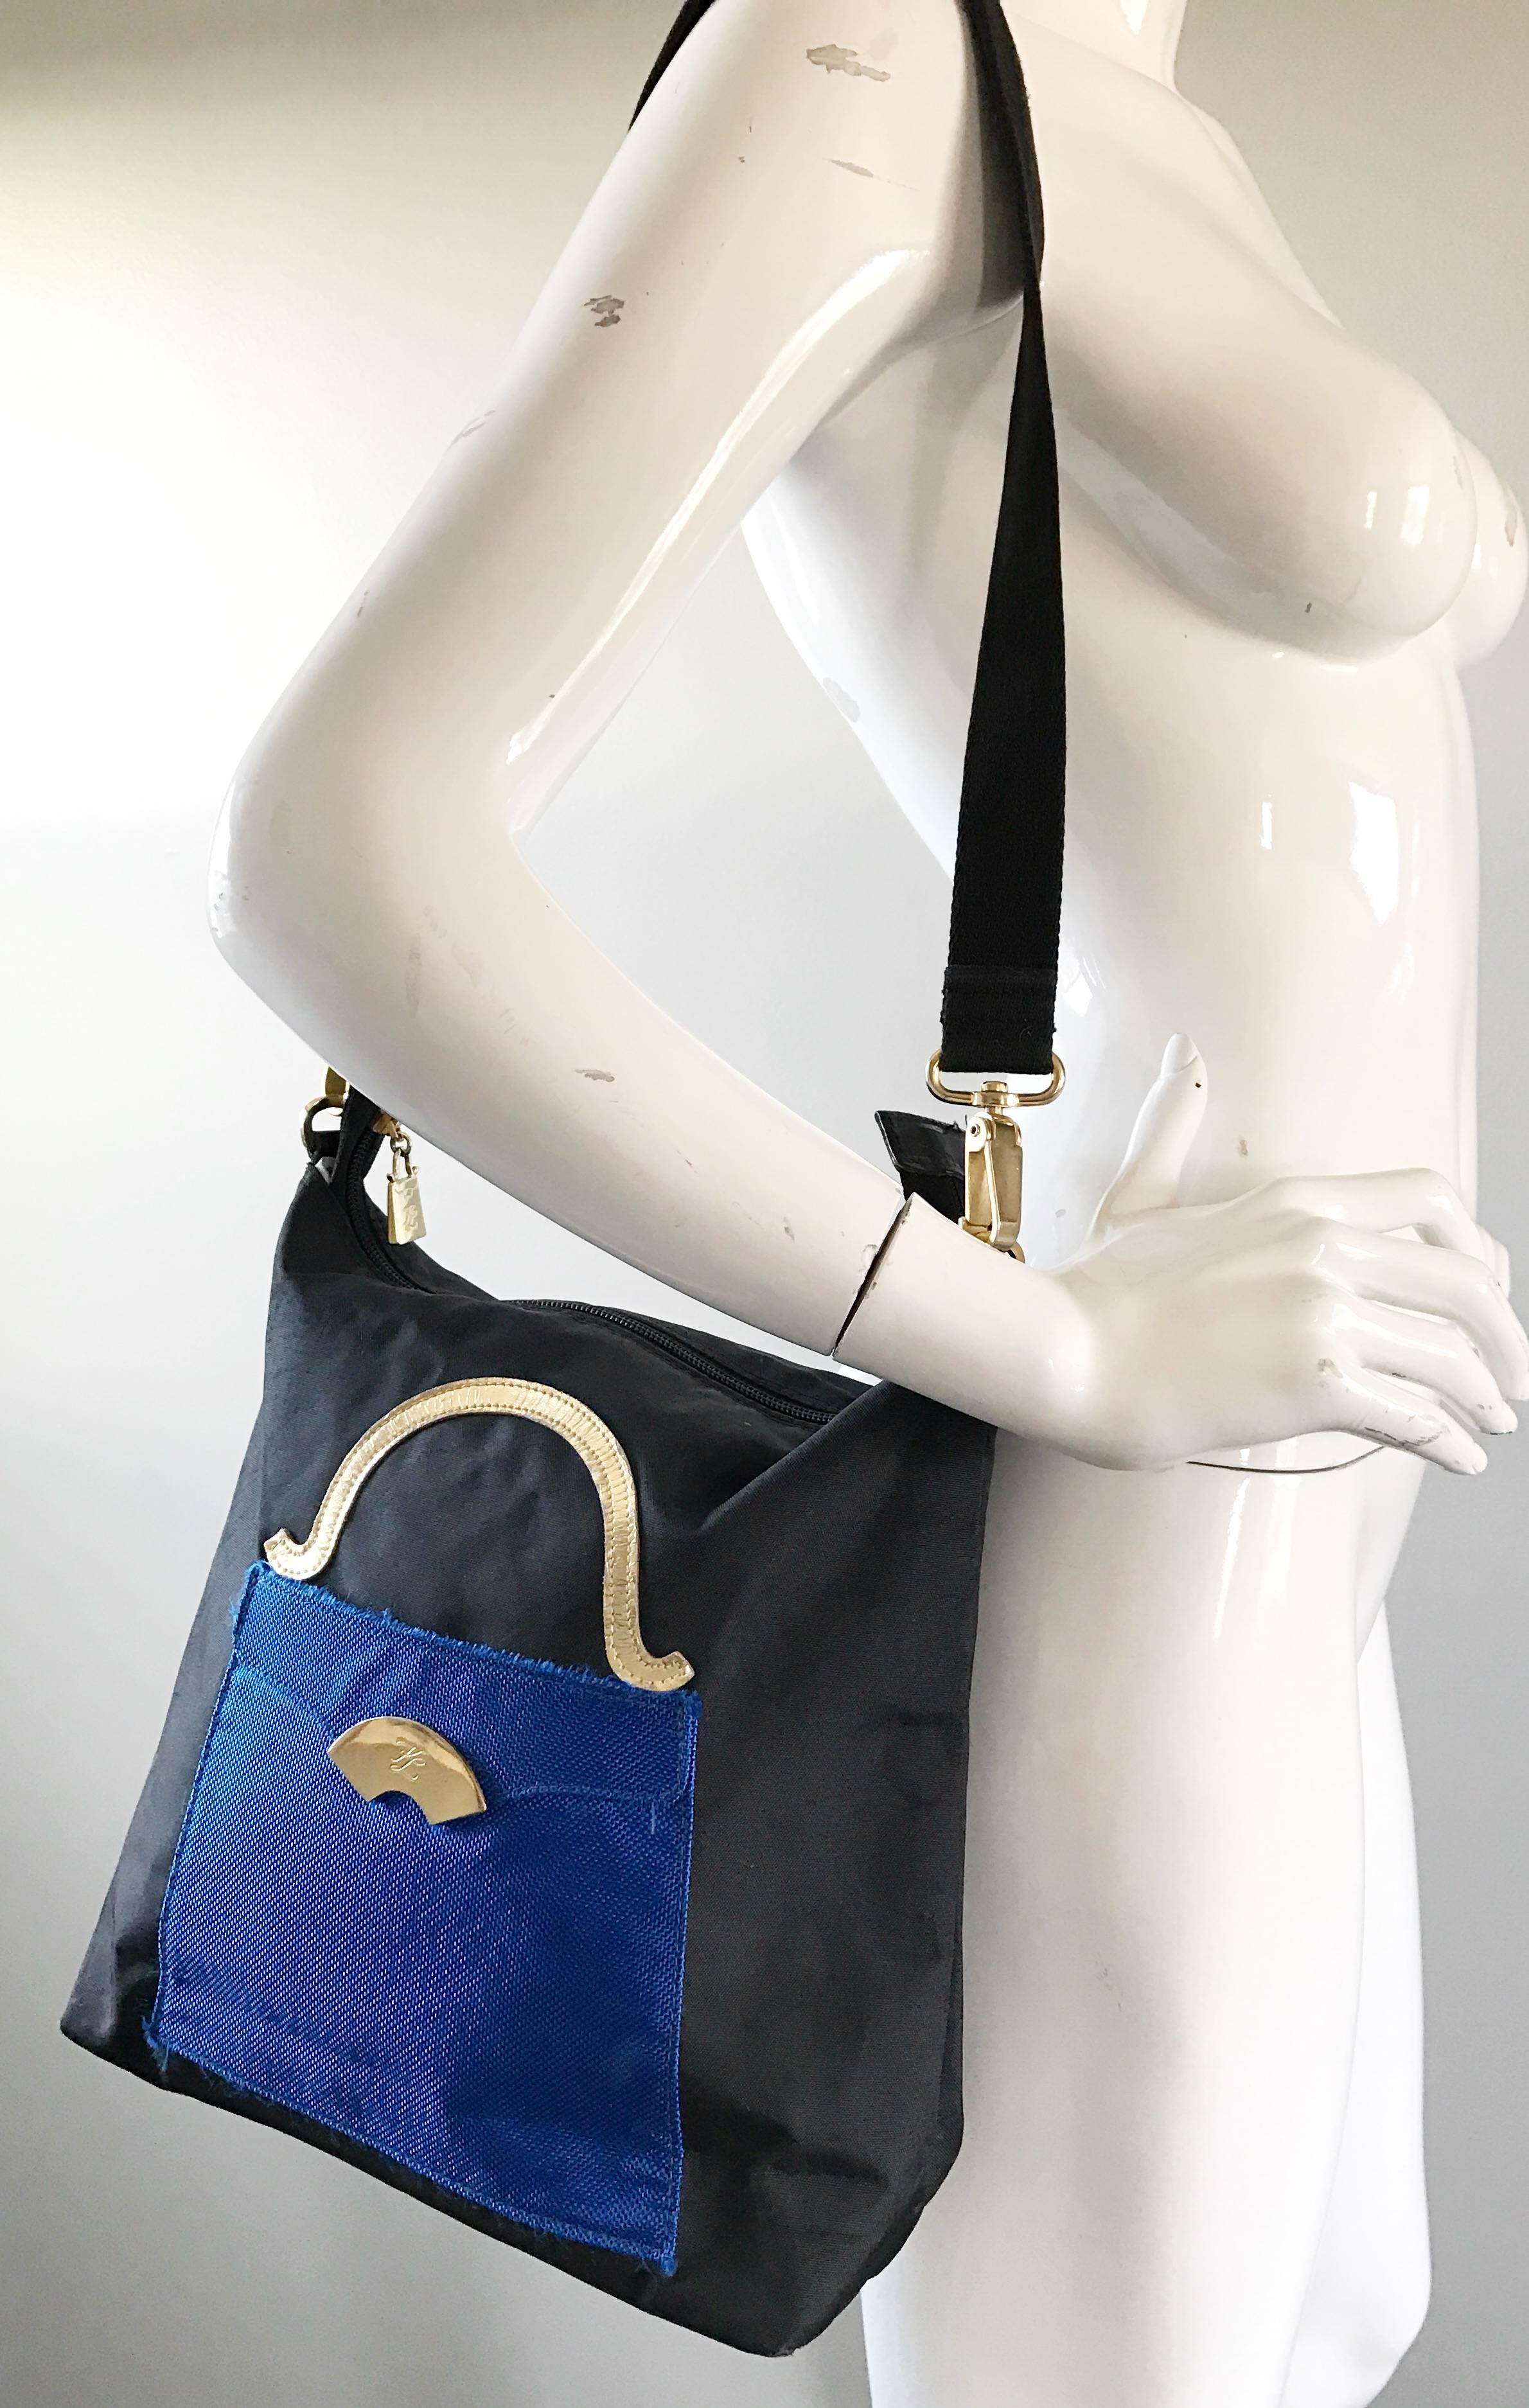 Amazing 90s KARL LAGERFELD nylon trompe l'oeil handbag! Features a purse on a purse! Vibrant royal blue and black with white gold leather. 'KL' plaque at center. Blue section features a behind pocket. Zipper top secures everything, and features an